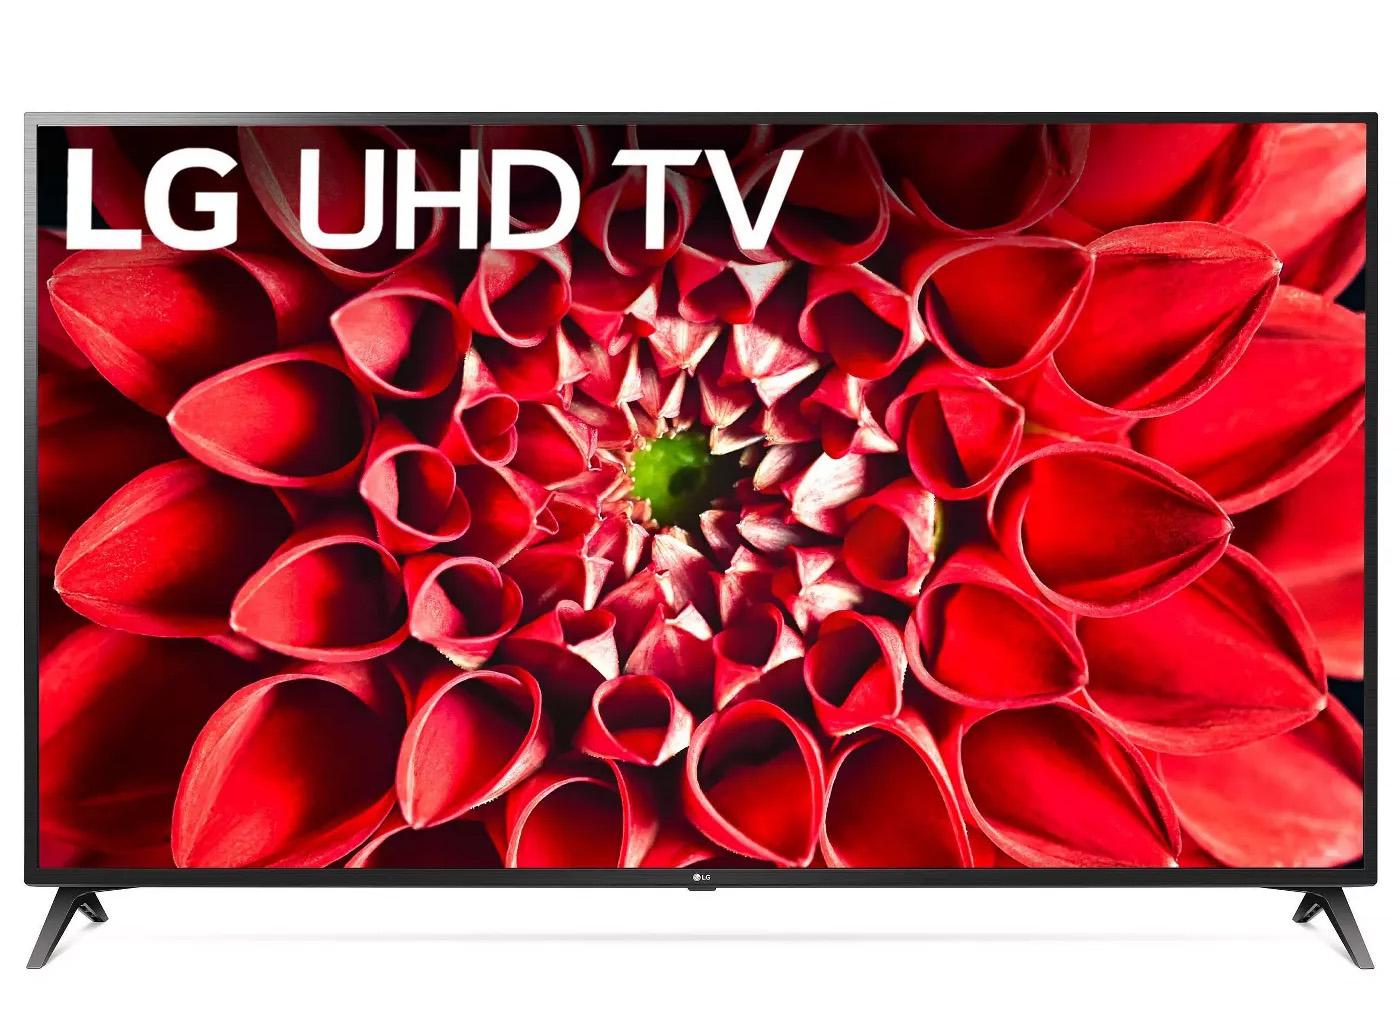 70in LG 70UN7070PUA 4K UHD HDR Smart LED HDTV for $579.99